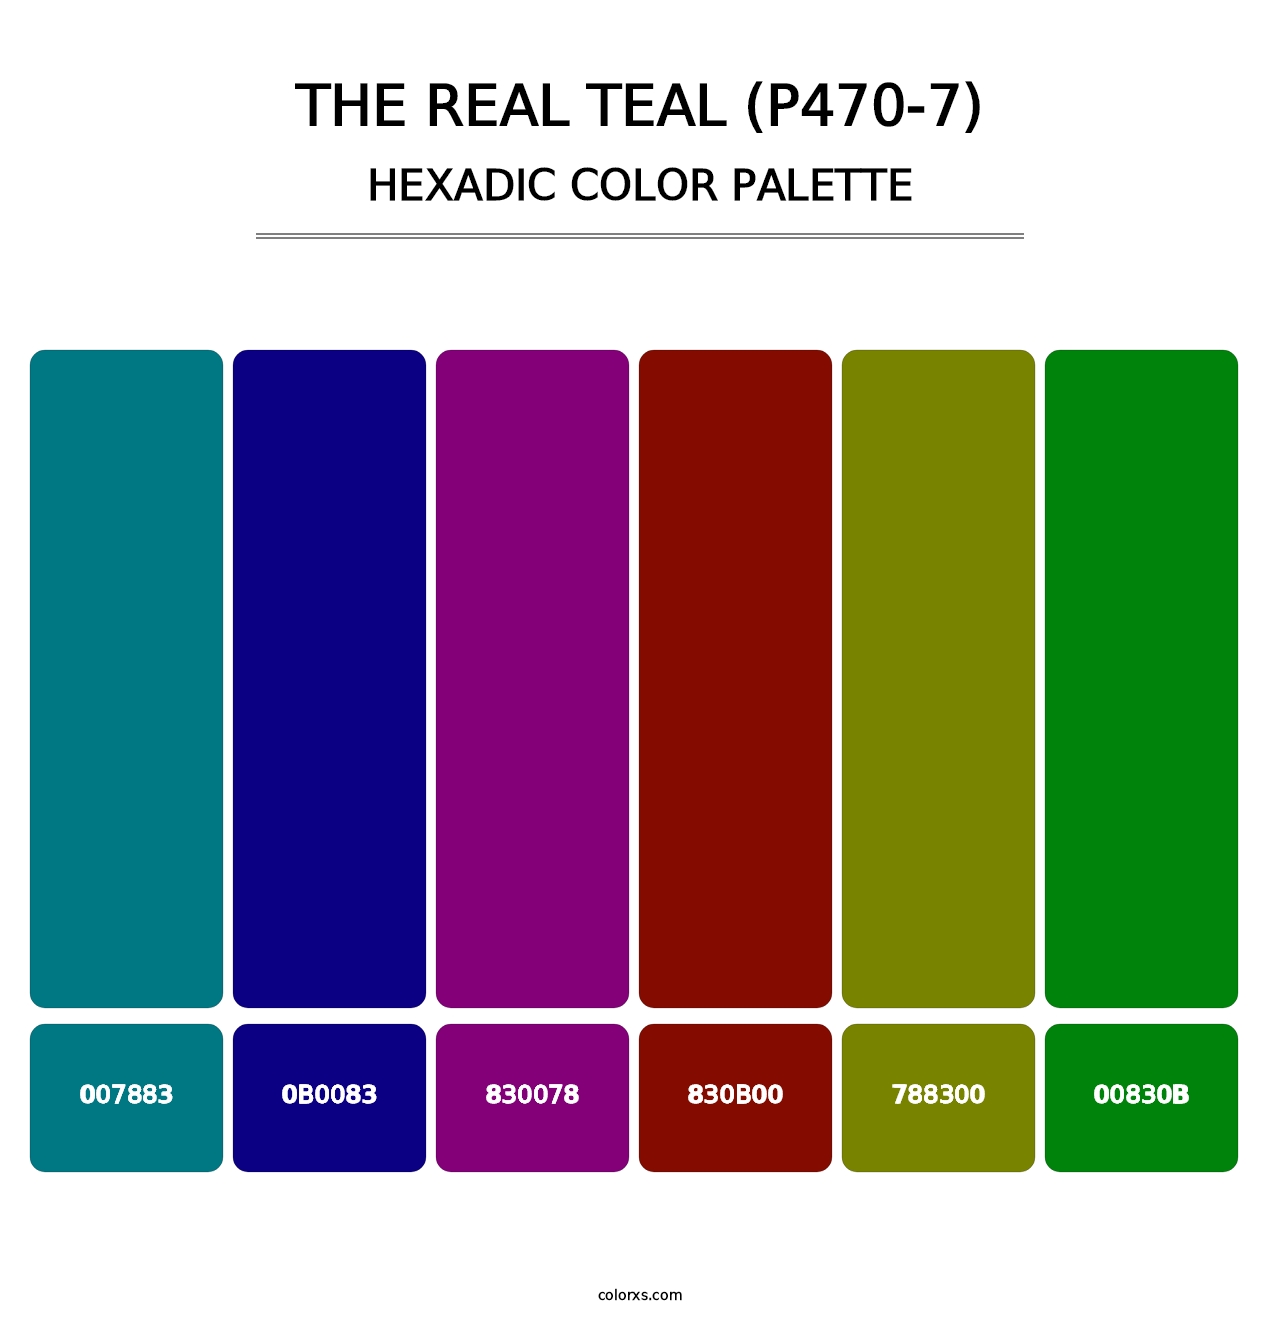 The Real Teal (P470-7) - Hexadic Color Palette